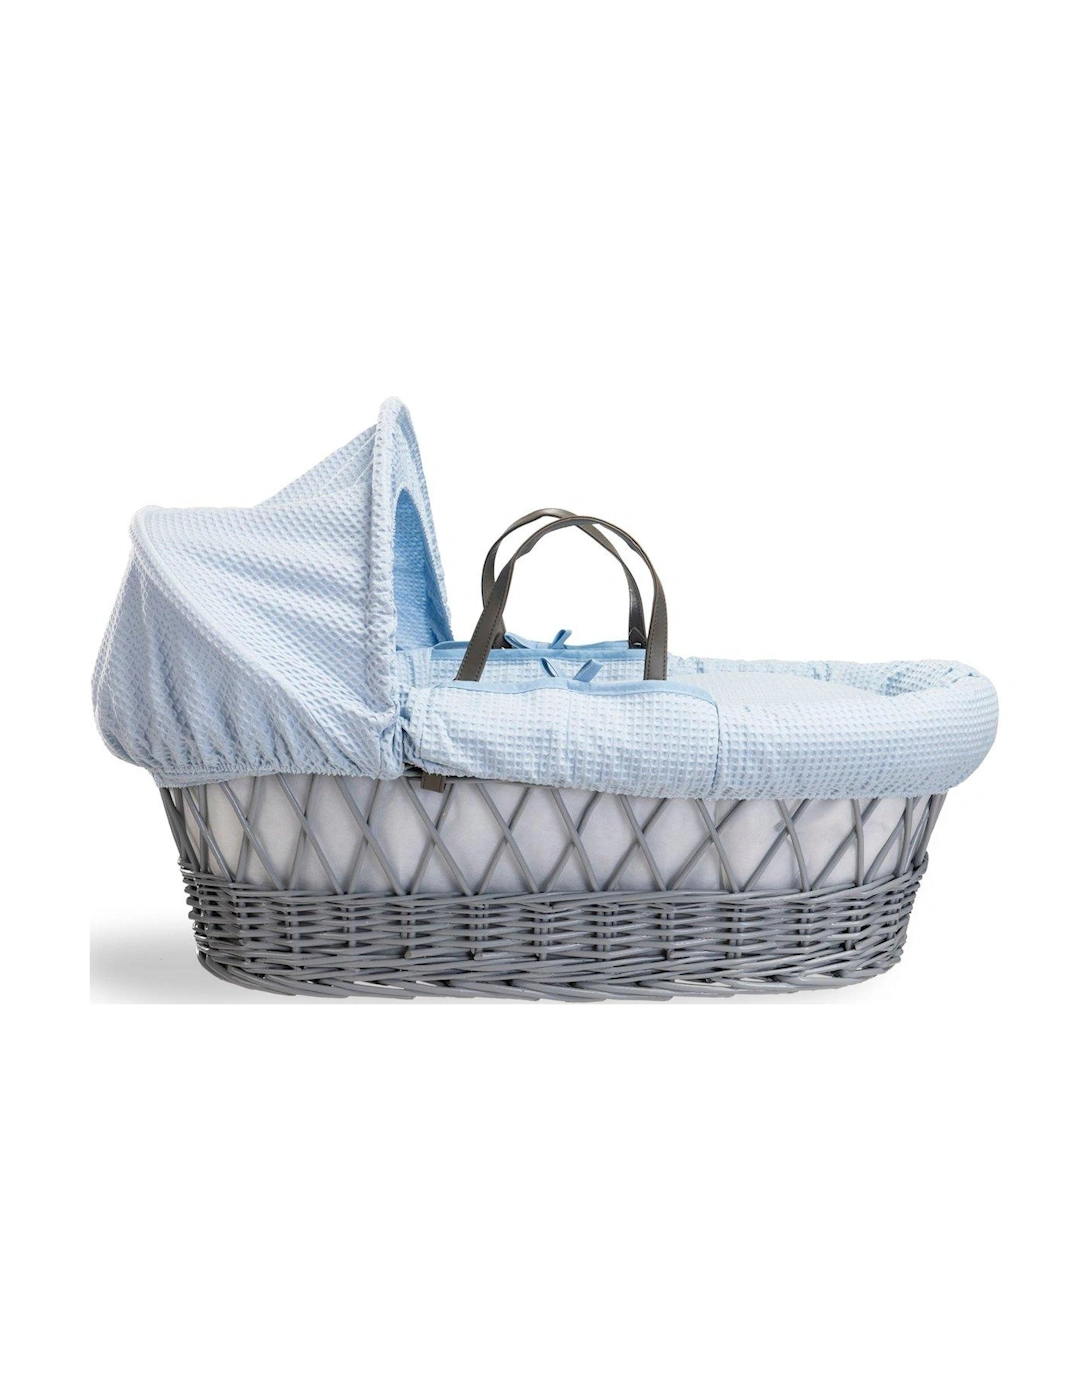 Waffle Blue Wicker & Deluxe Stand Grey